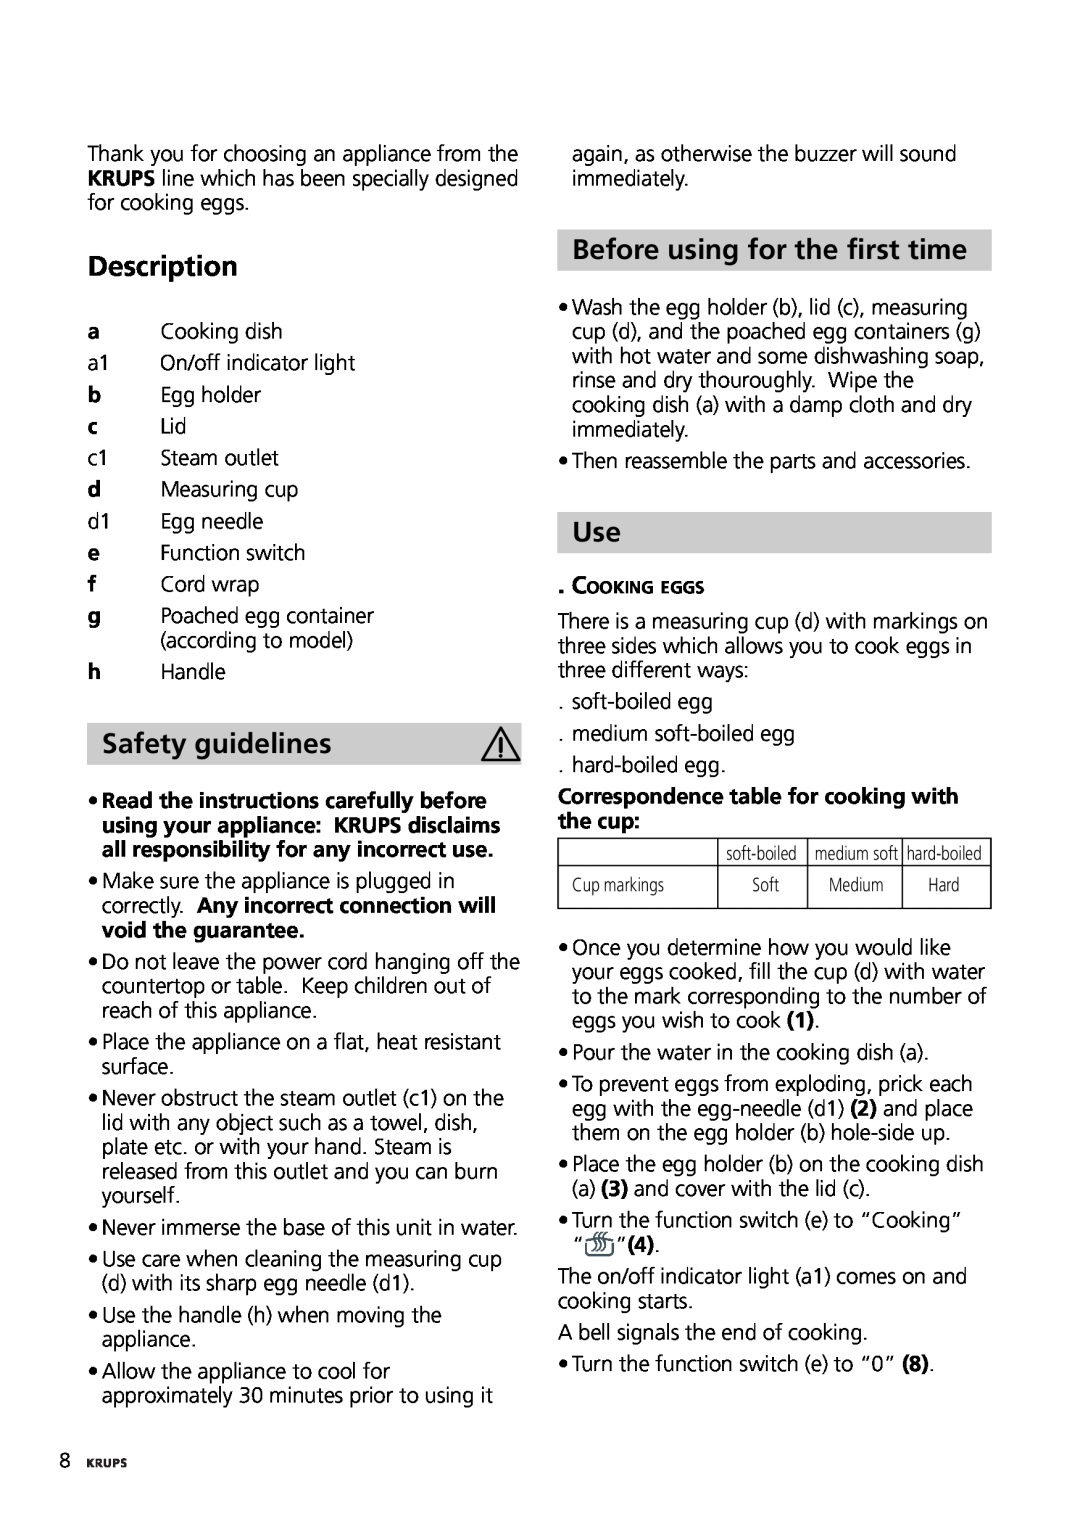 Krups F230 Description, Safety guidelines, Before using for the first time, Correspondence table for cooking with the cup 